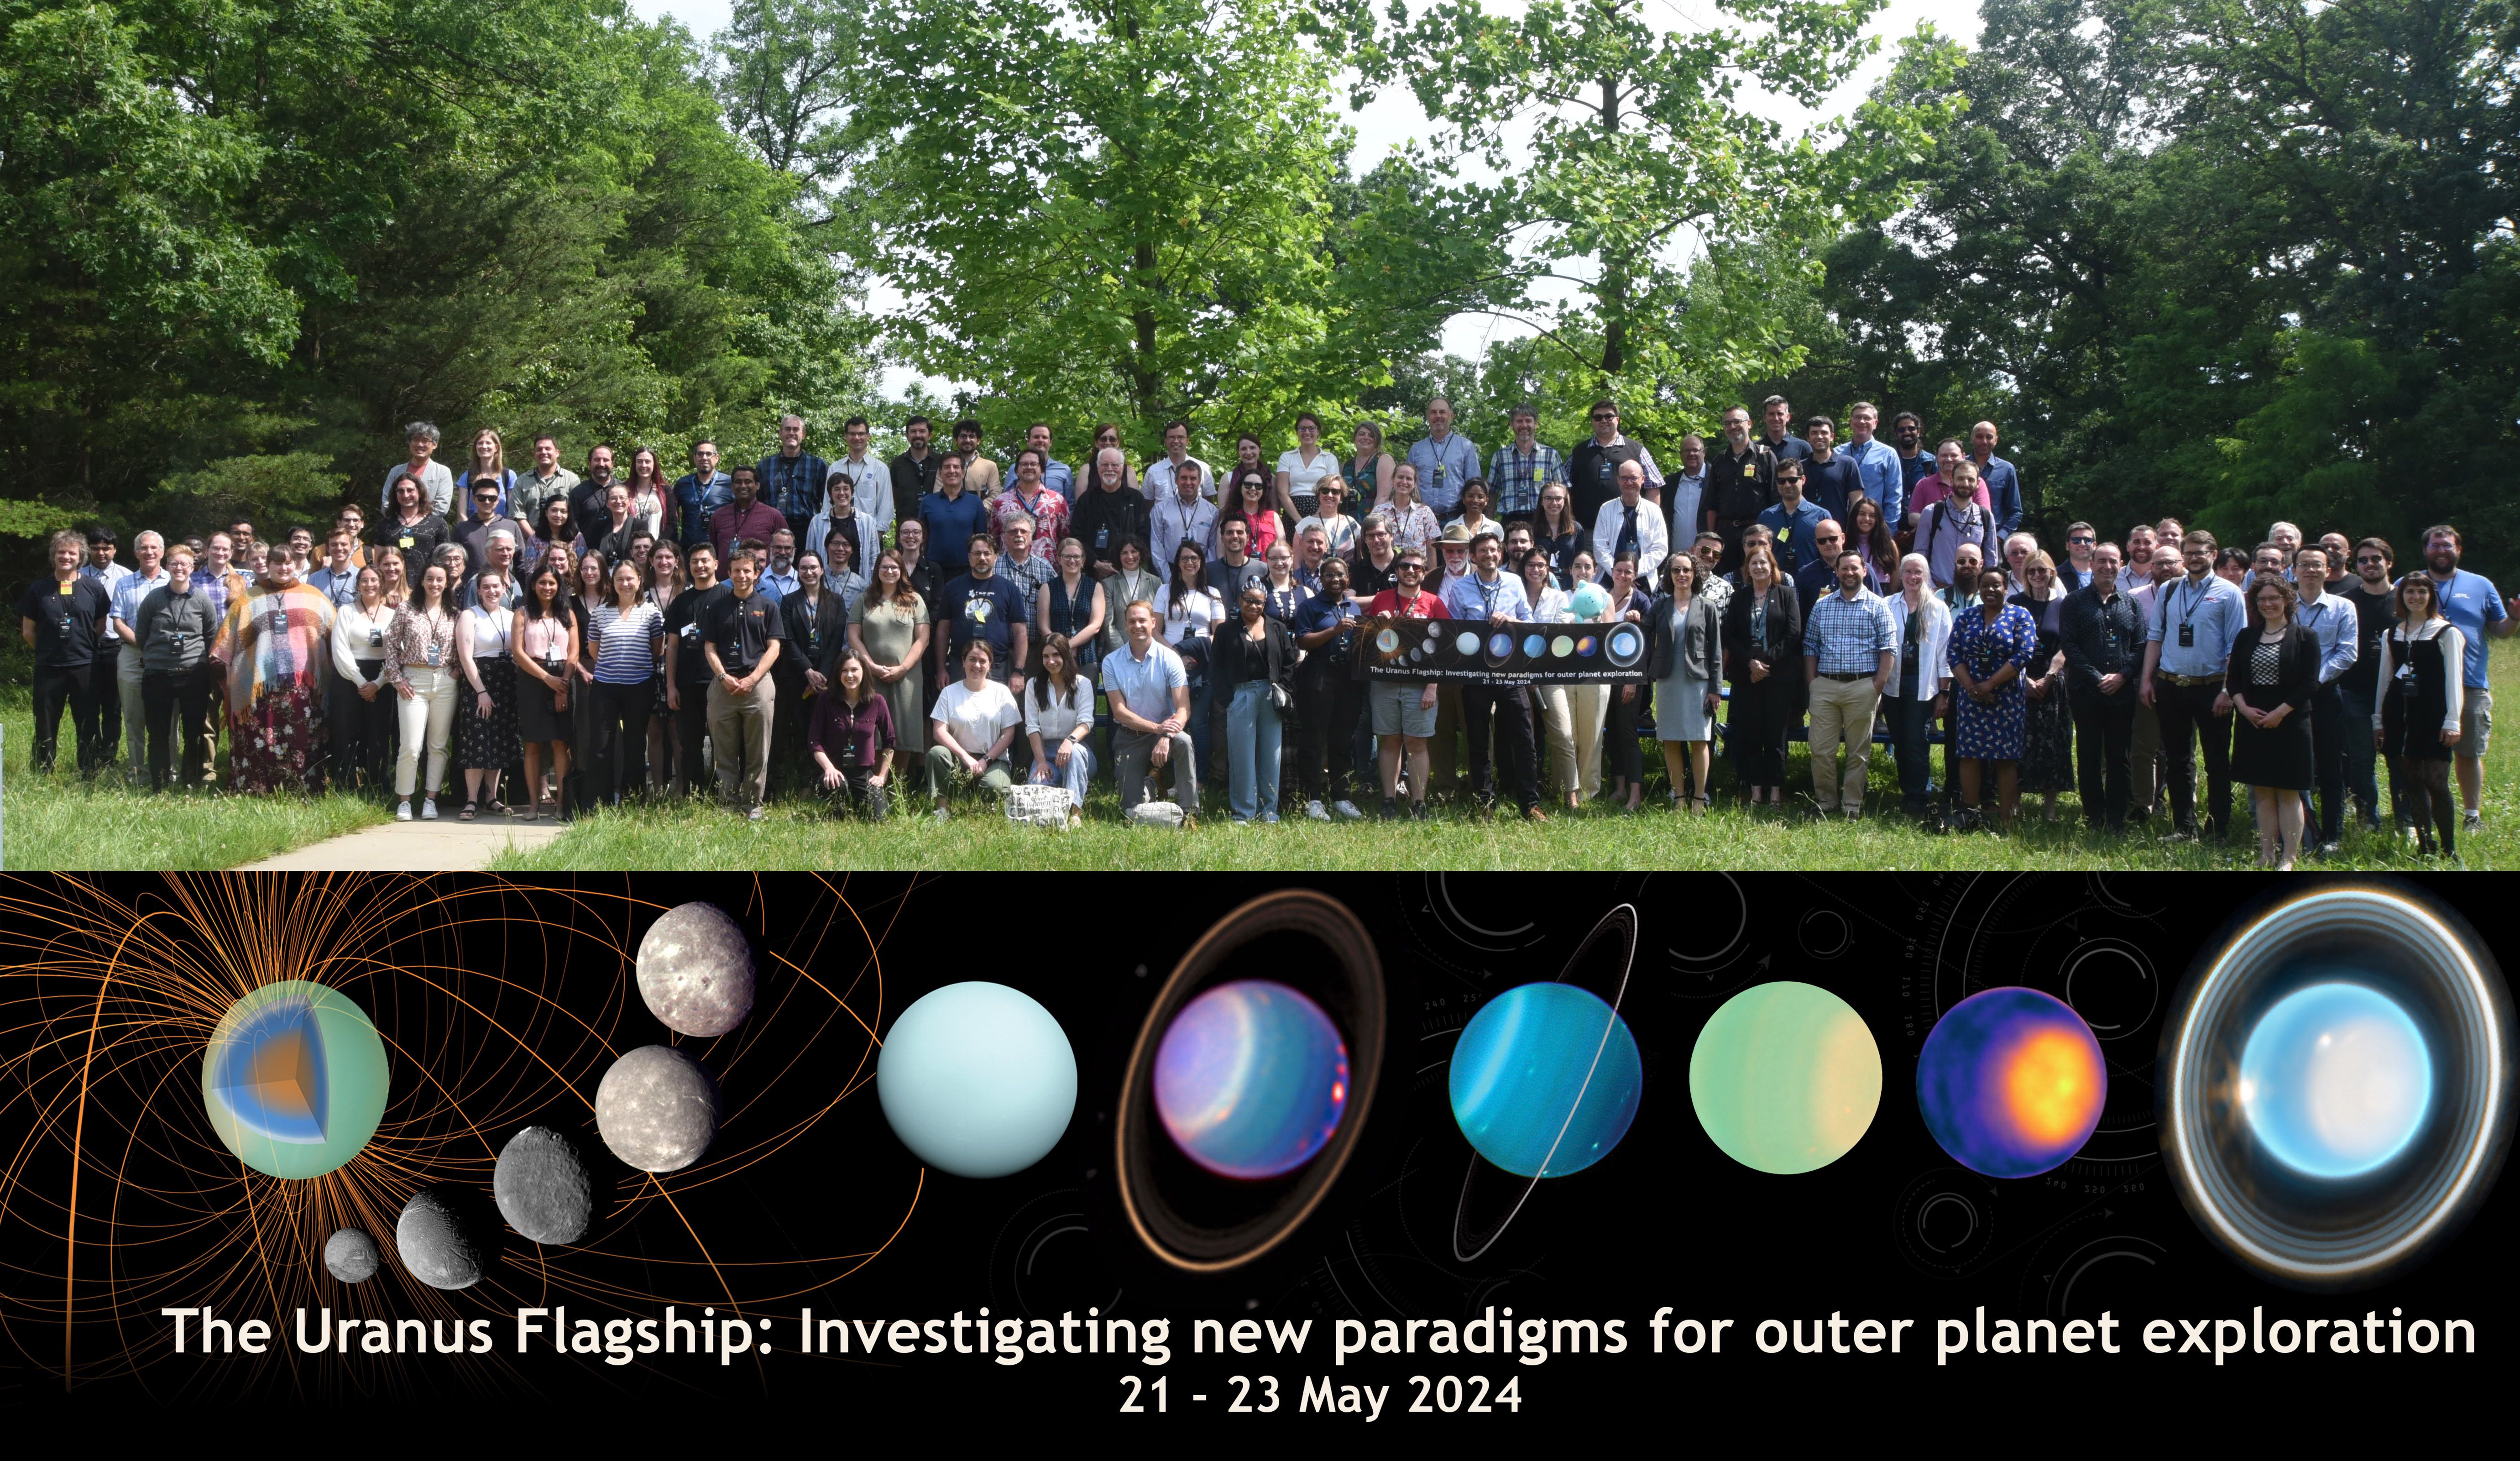 top: group photo of attendees and organizers; bottom: multiple images of uranus and its moons